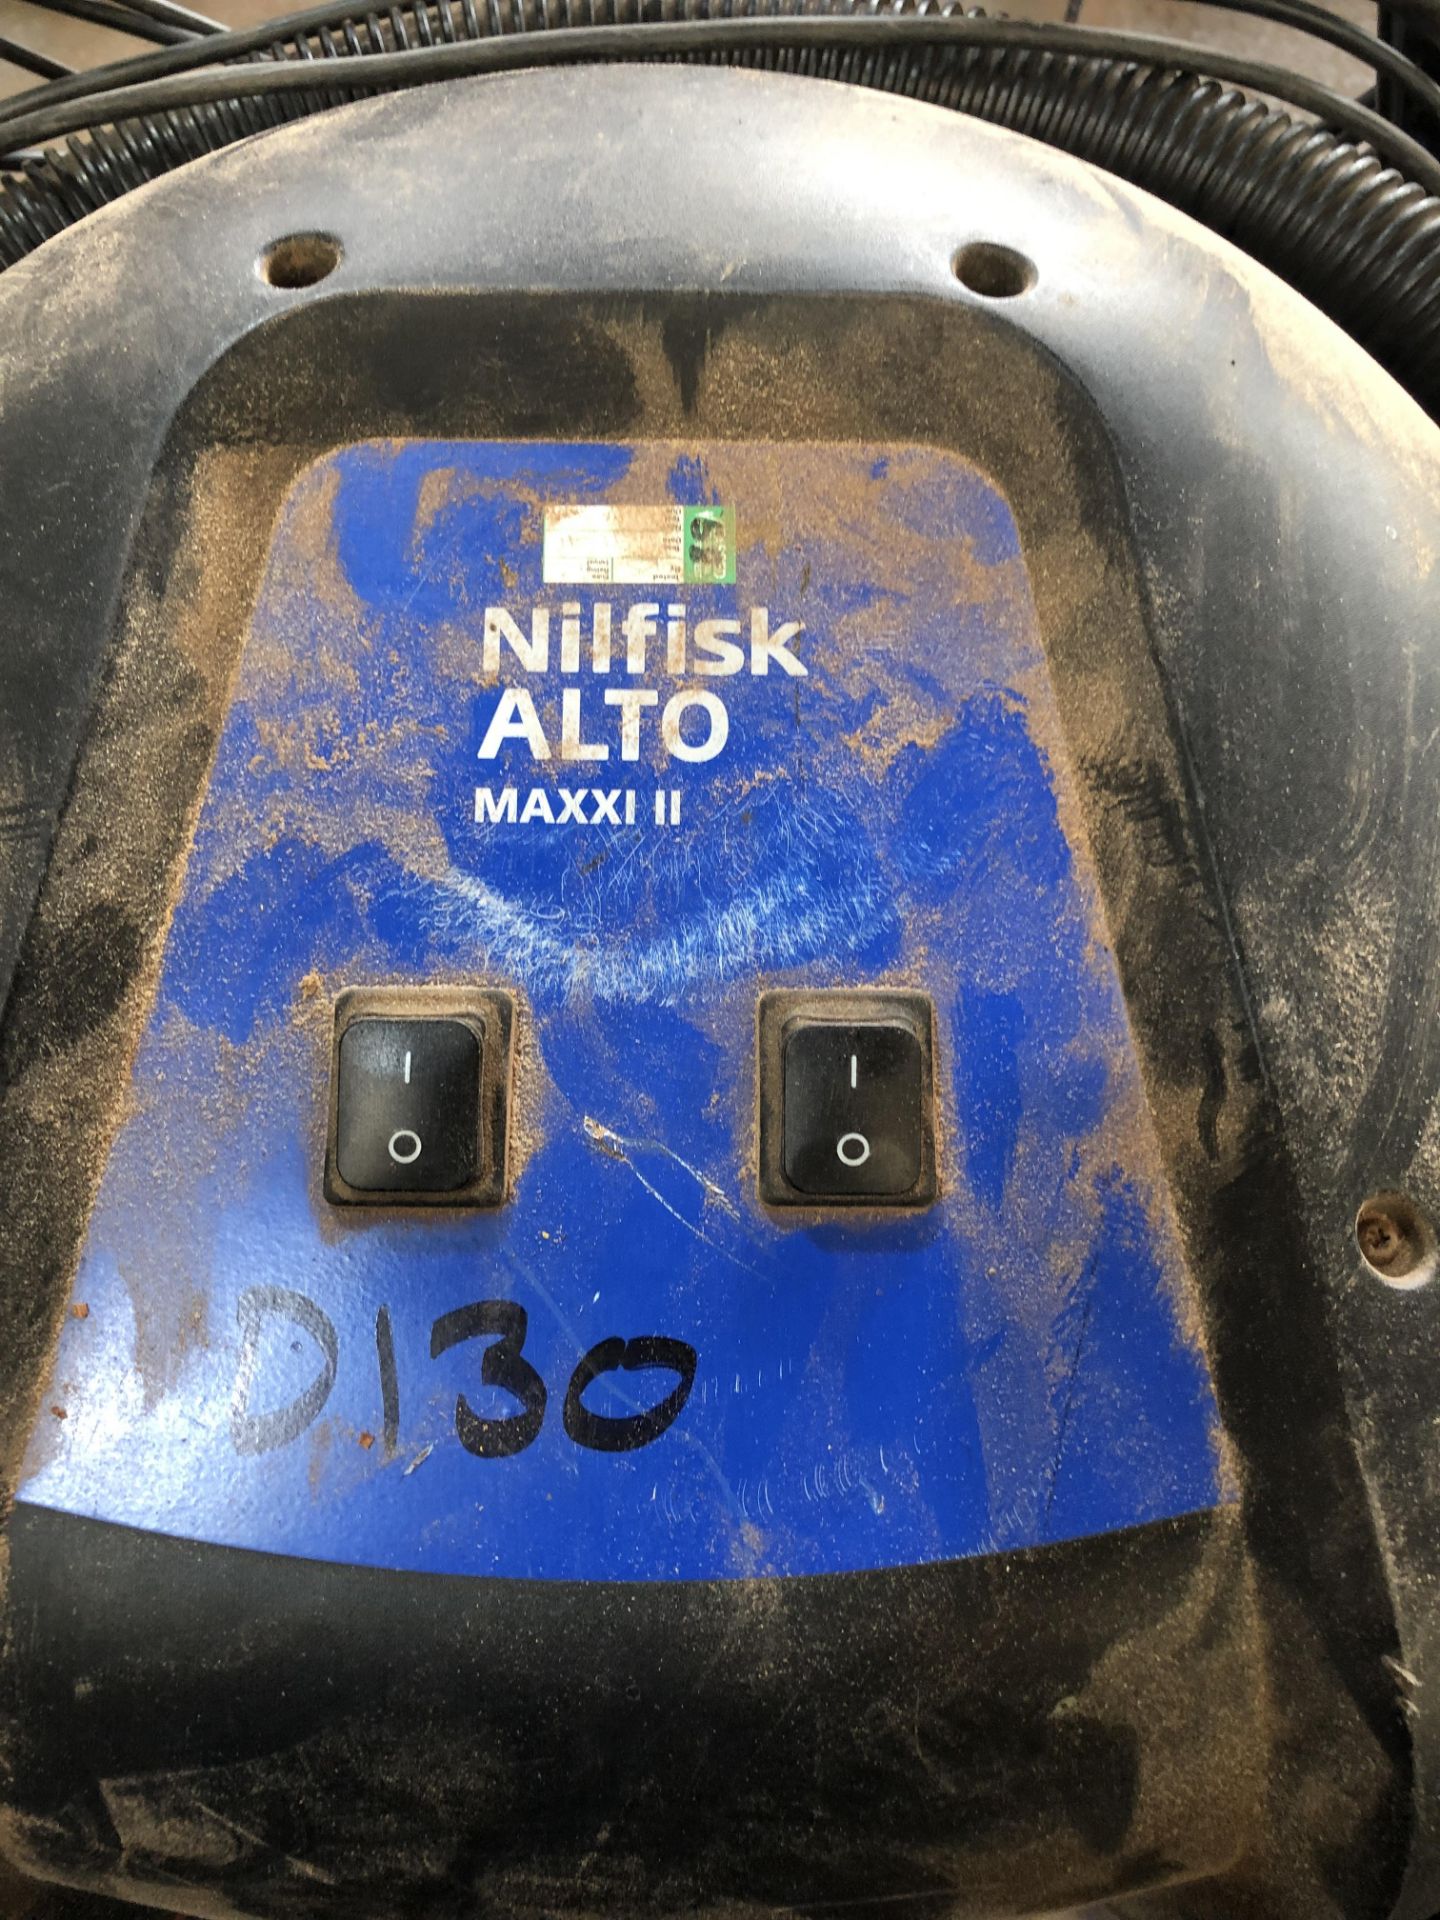 Nilfisk Alto Maxxi 1120v Commercial Vacuum Cleaner (Please note: Collection by appointment Wednesday - Image 5 of 7